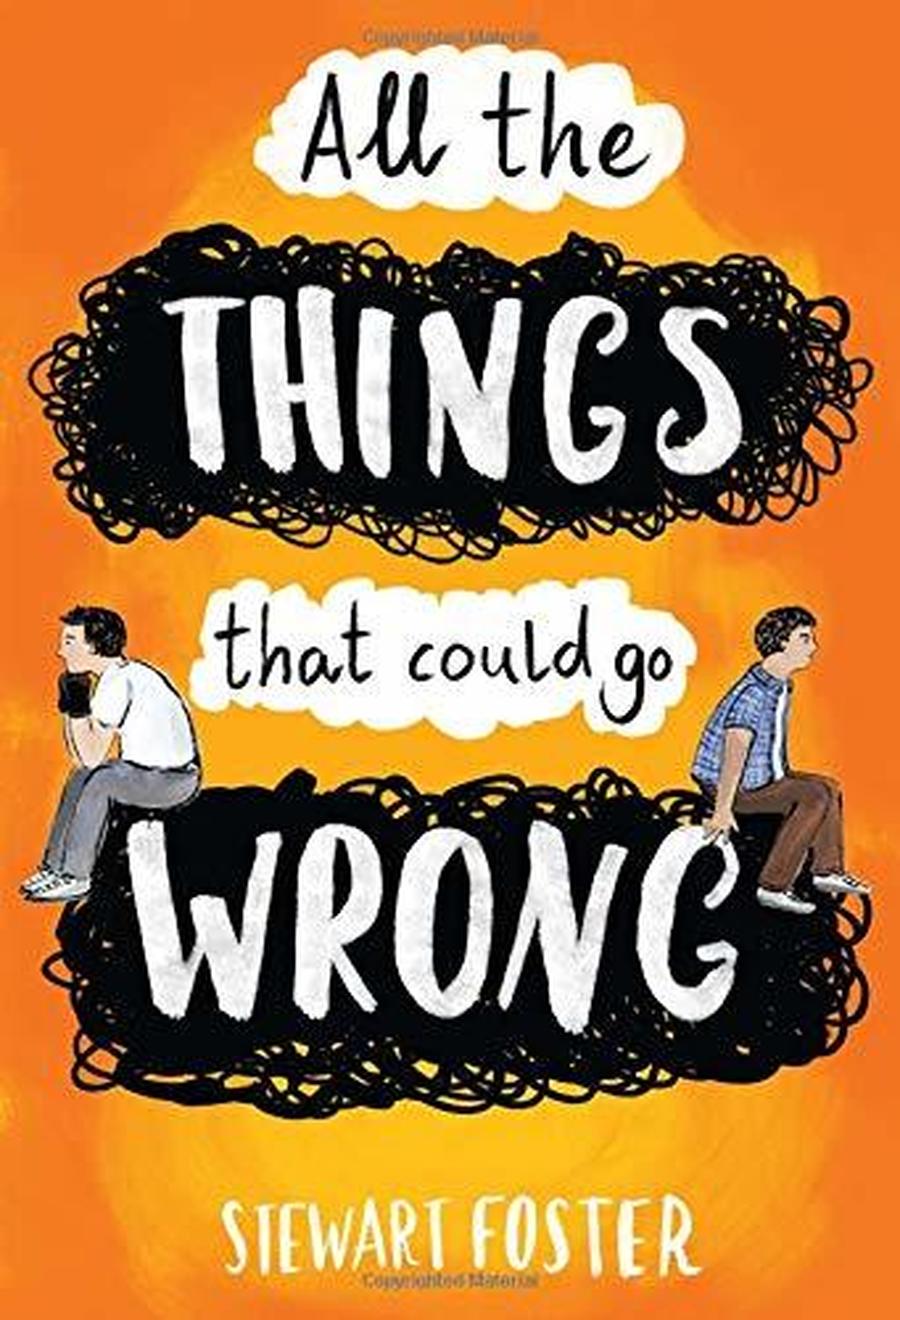 All the Things That Could Go Wrong - Stewart Foster